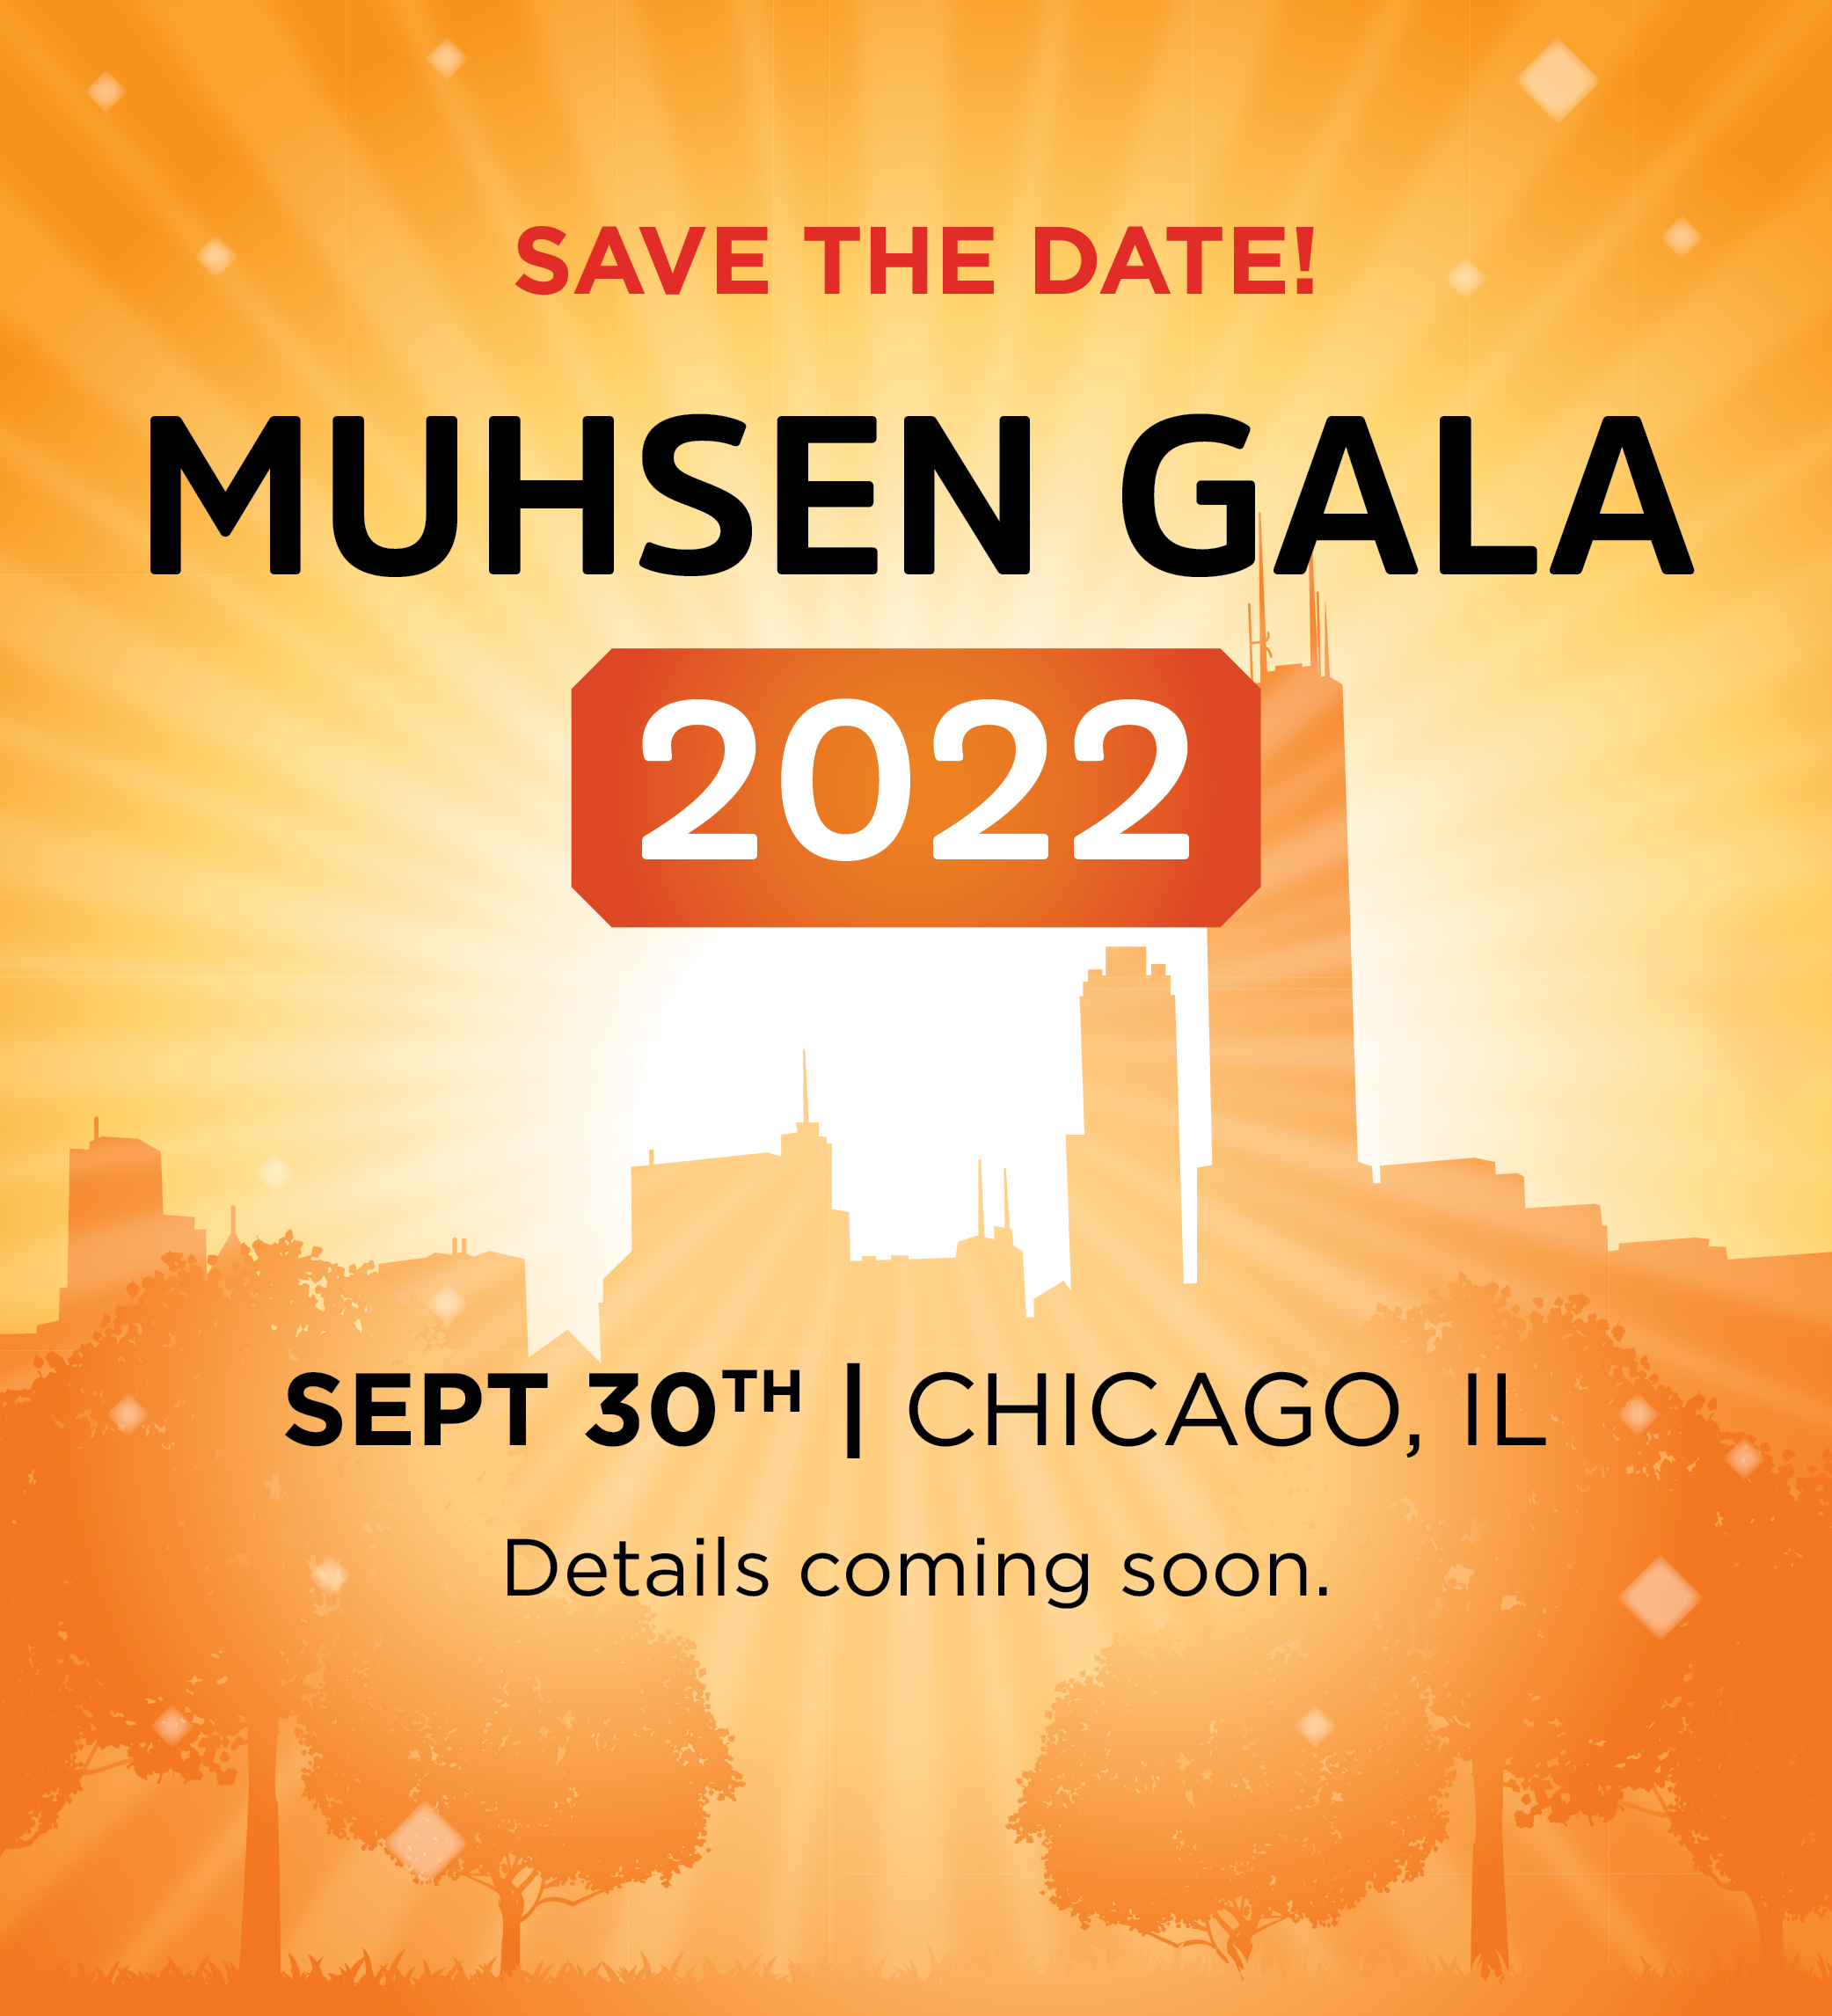 Orange background. Save the date! Muhsen gala 2022. September 30th Chicago IL Details coming soon.